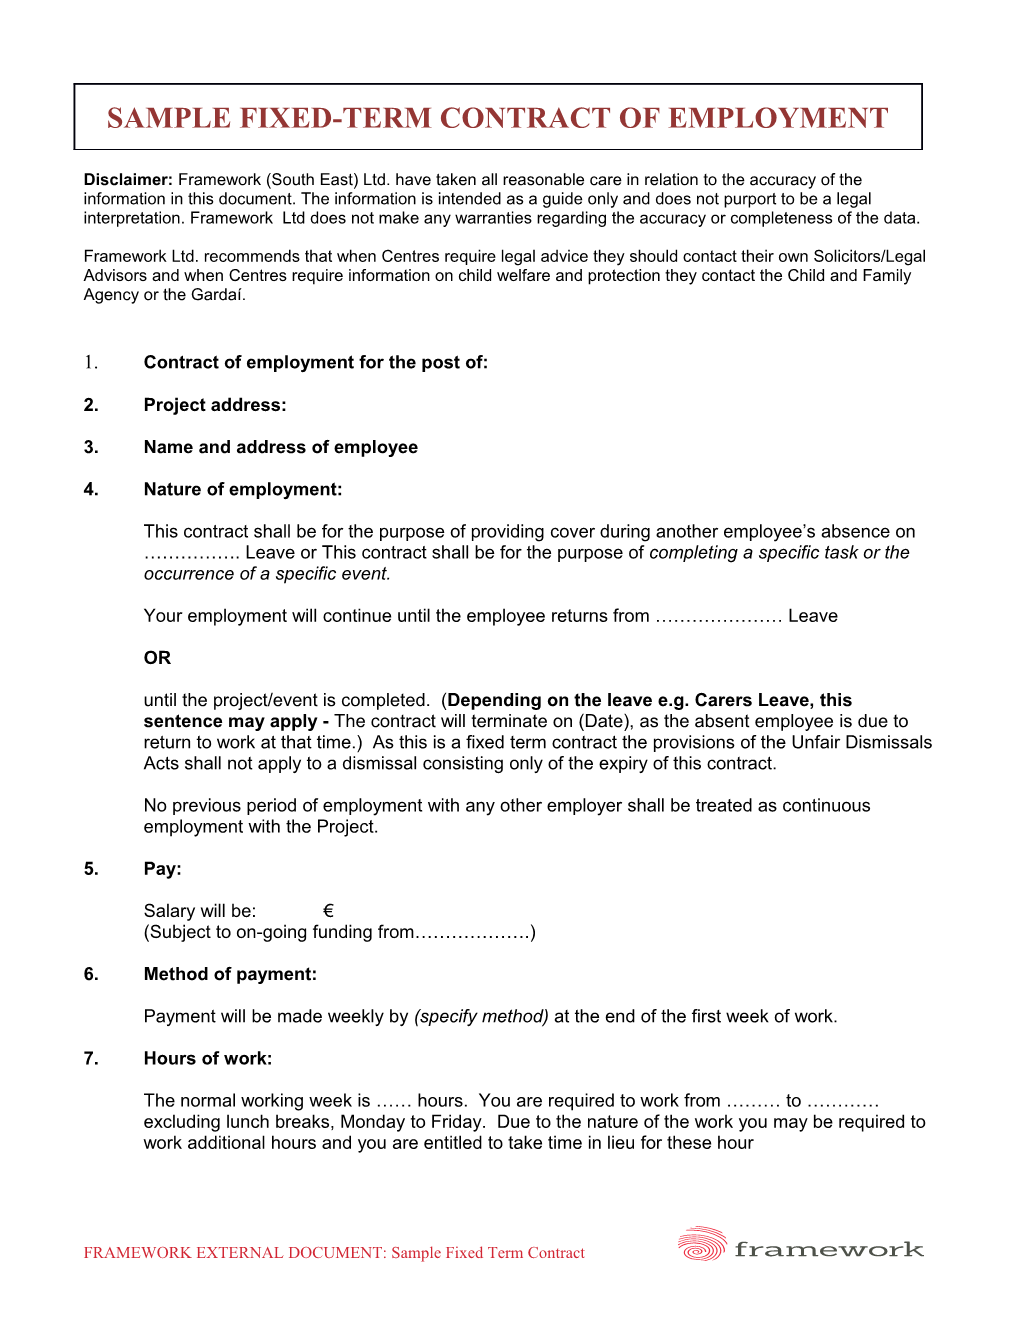 Sample Fixed-Term Contract of Employment